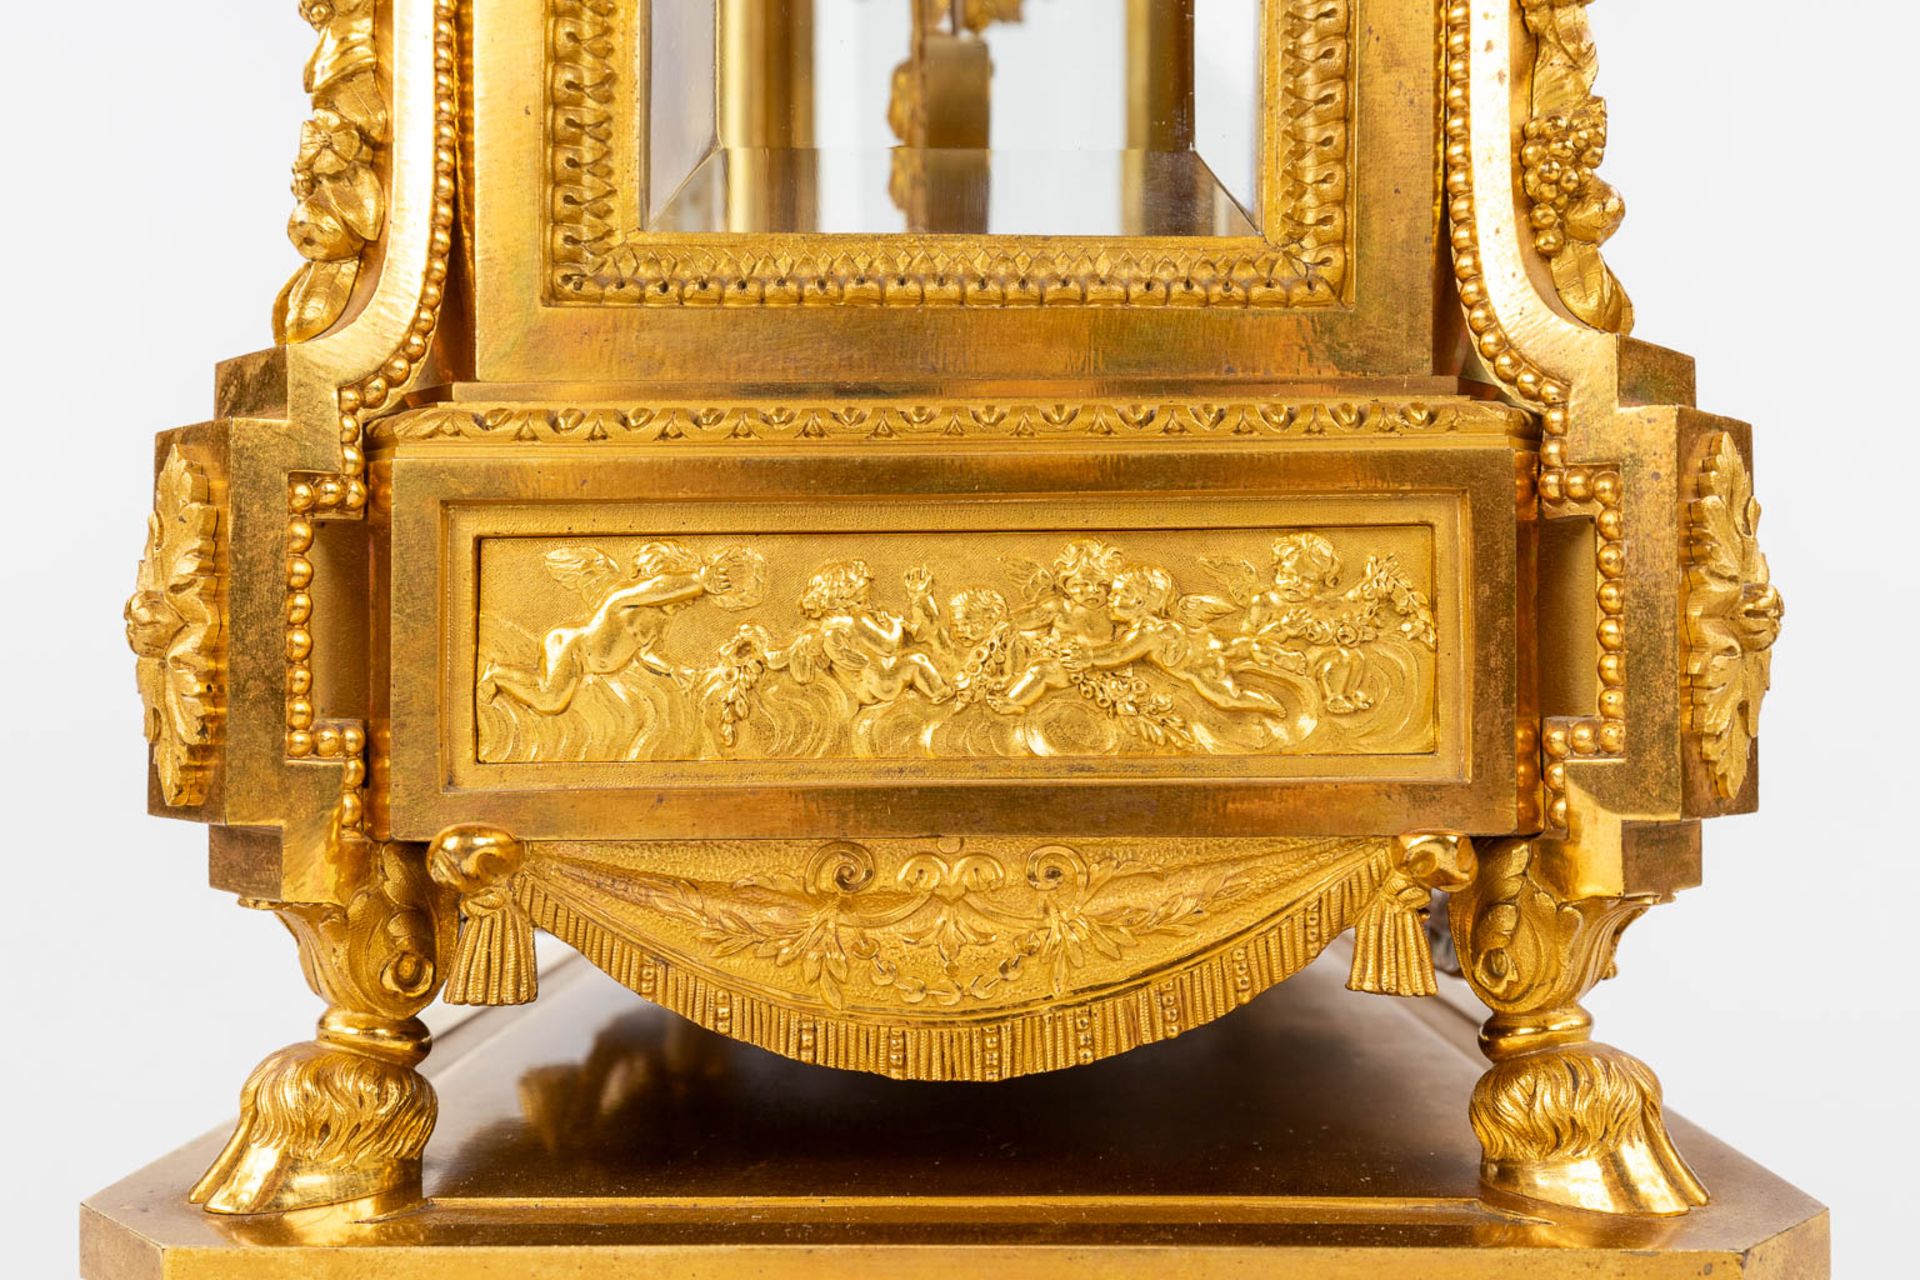 An imposing three-piece mantle garniture clock and candelabra, gilt bronze in Louis XVI style. Maiso - Image 21 of 38